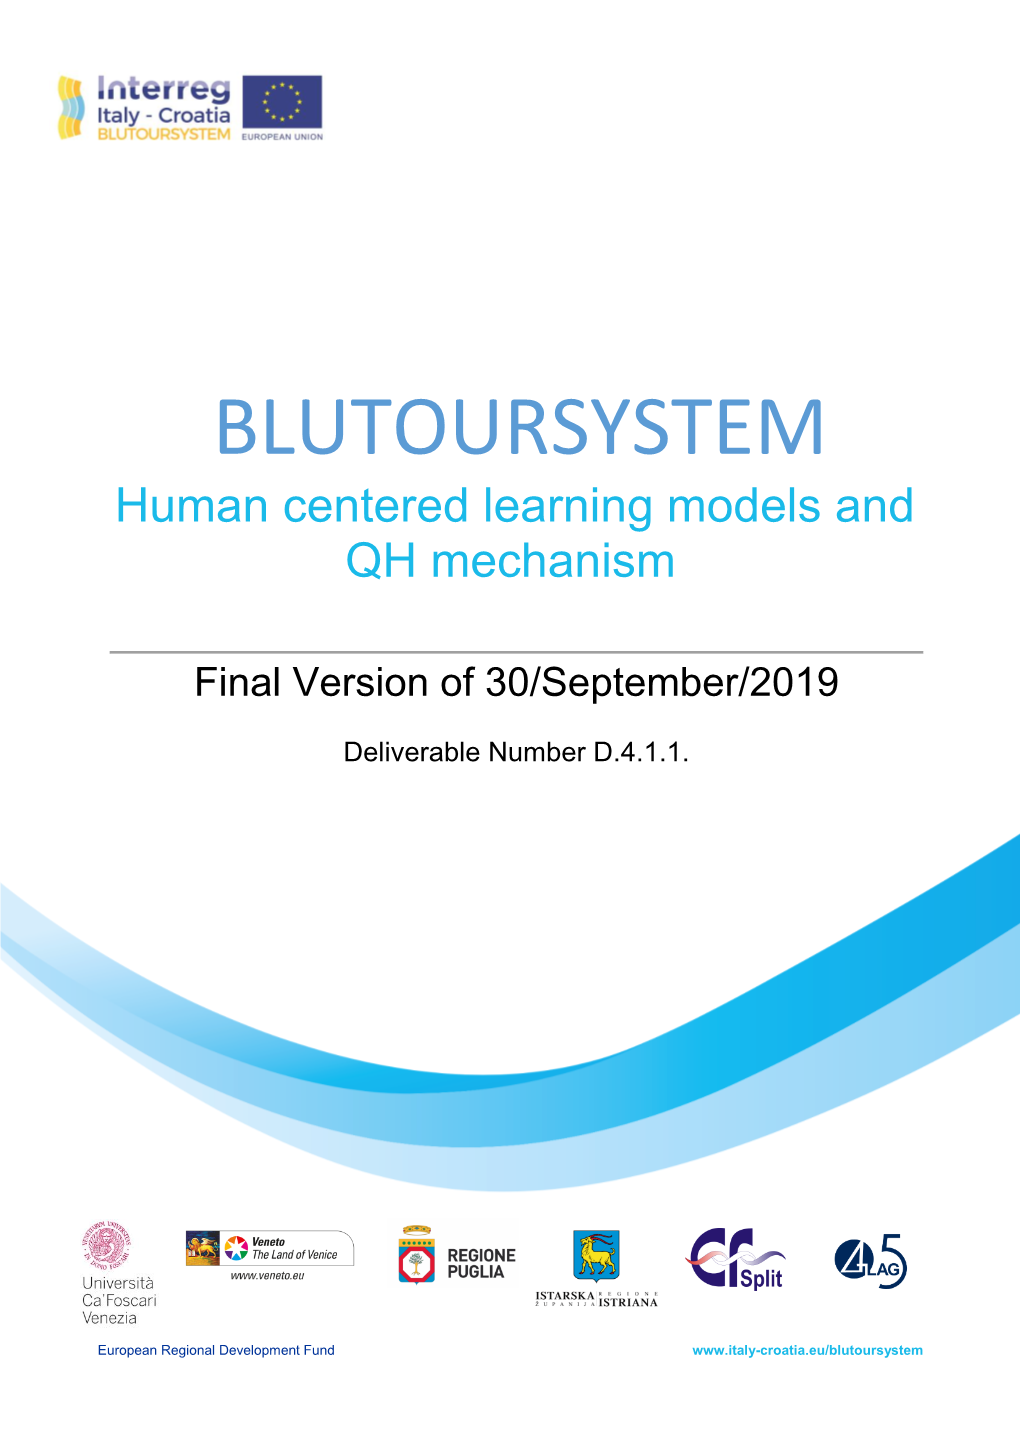 BLUTOURSYSTEM Human Centered Learning Models And